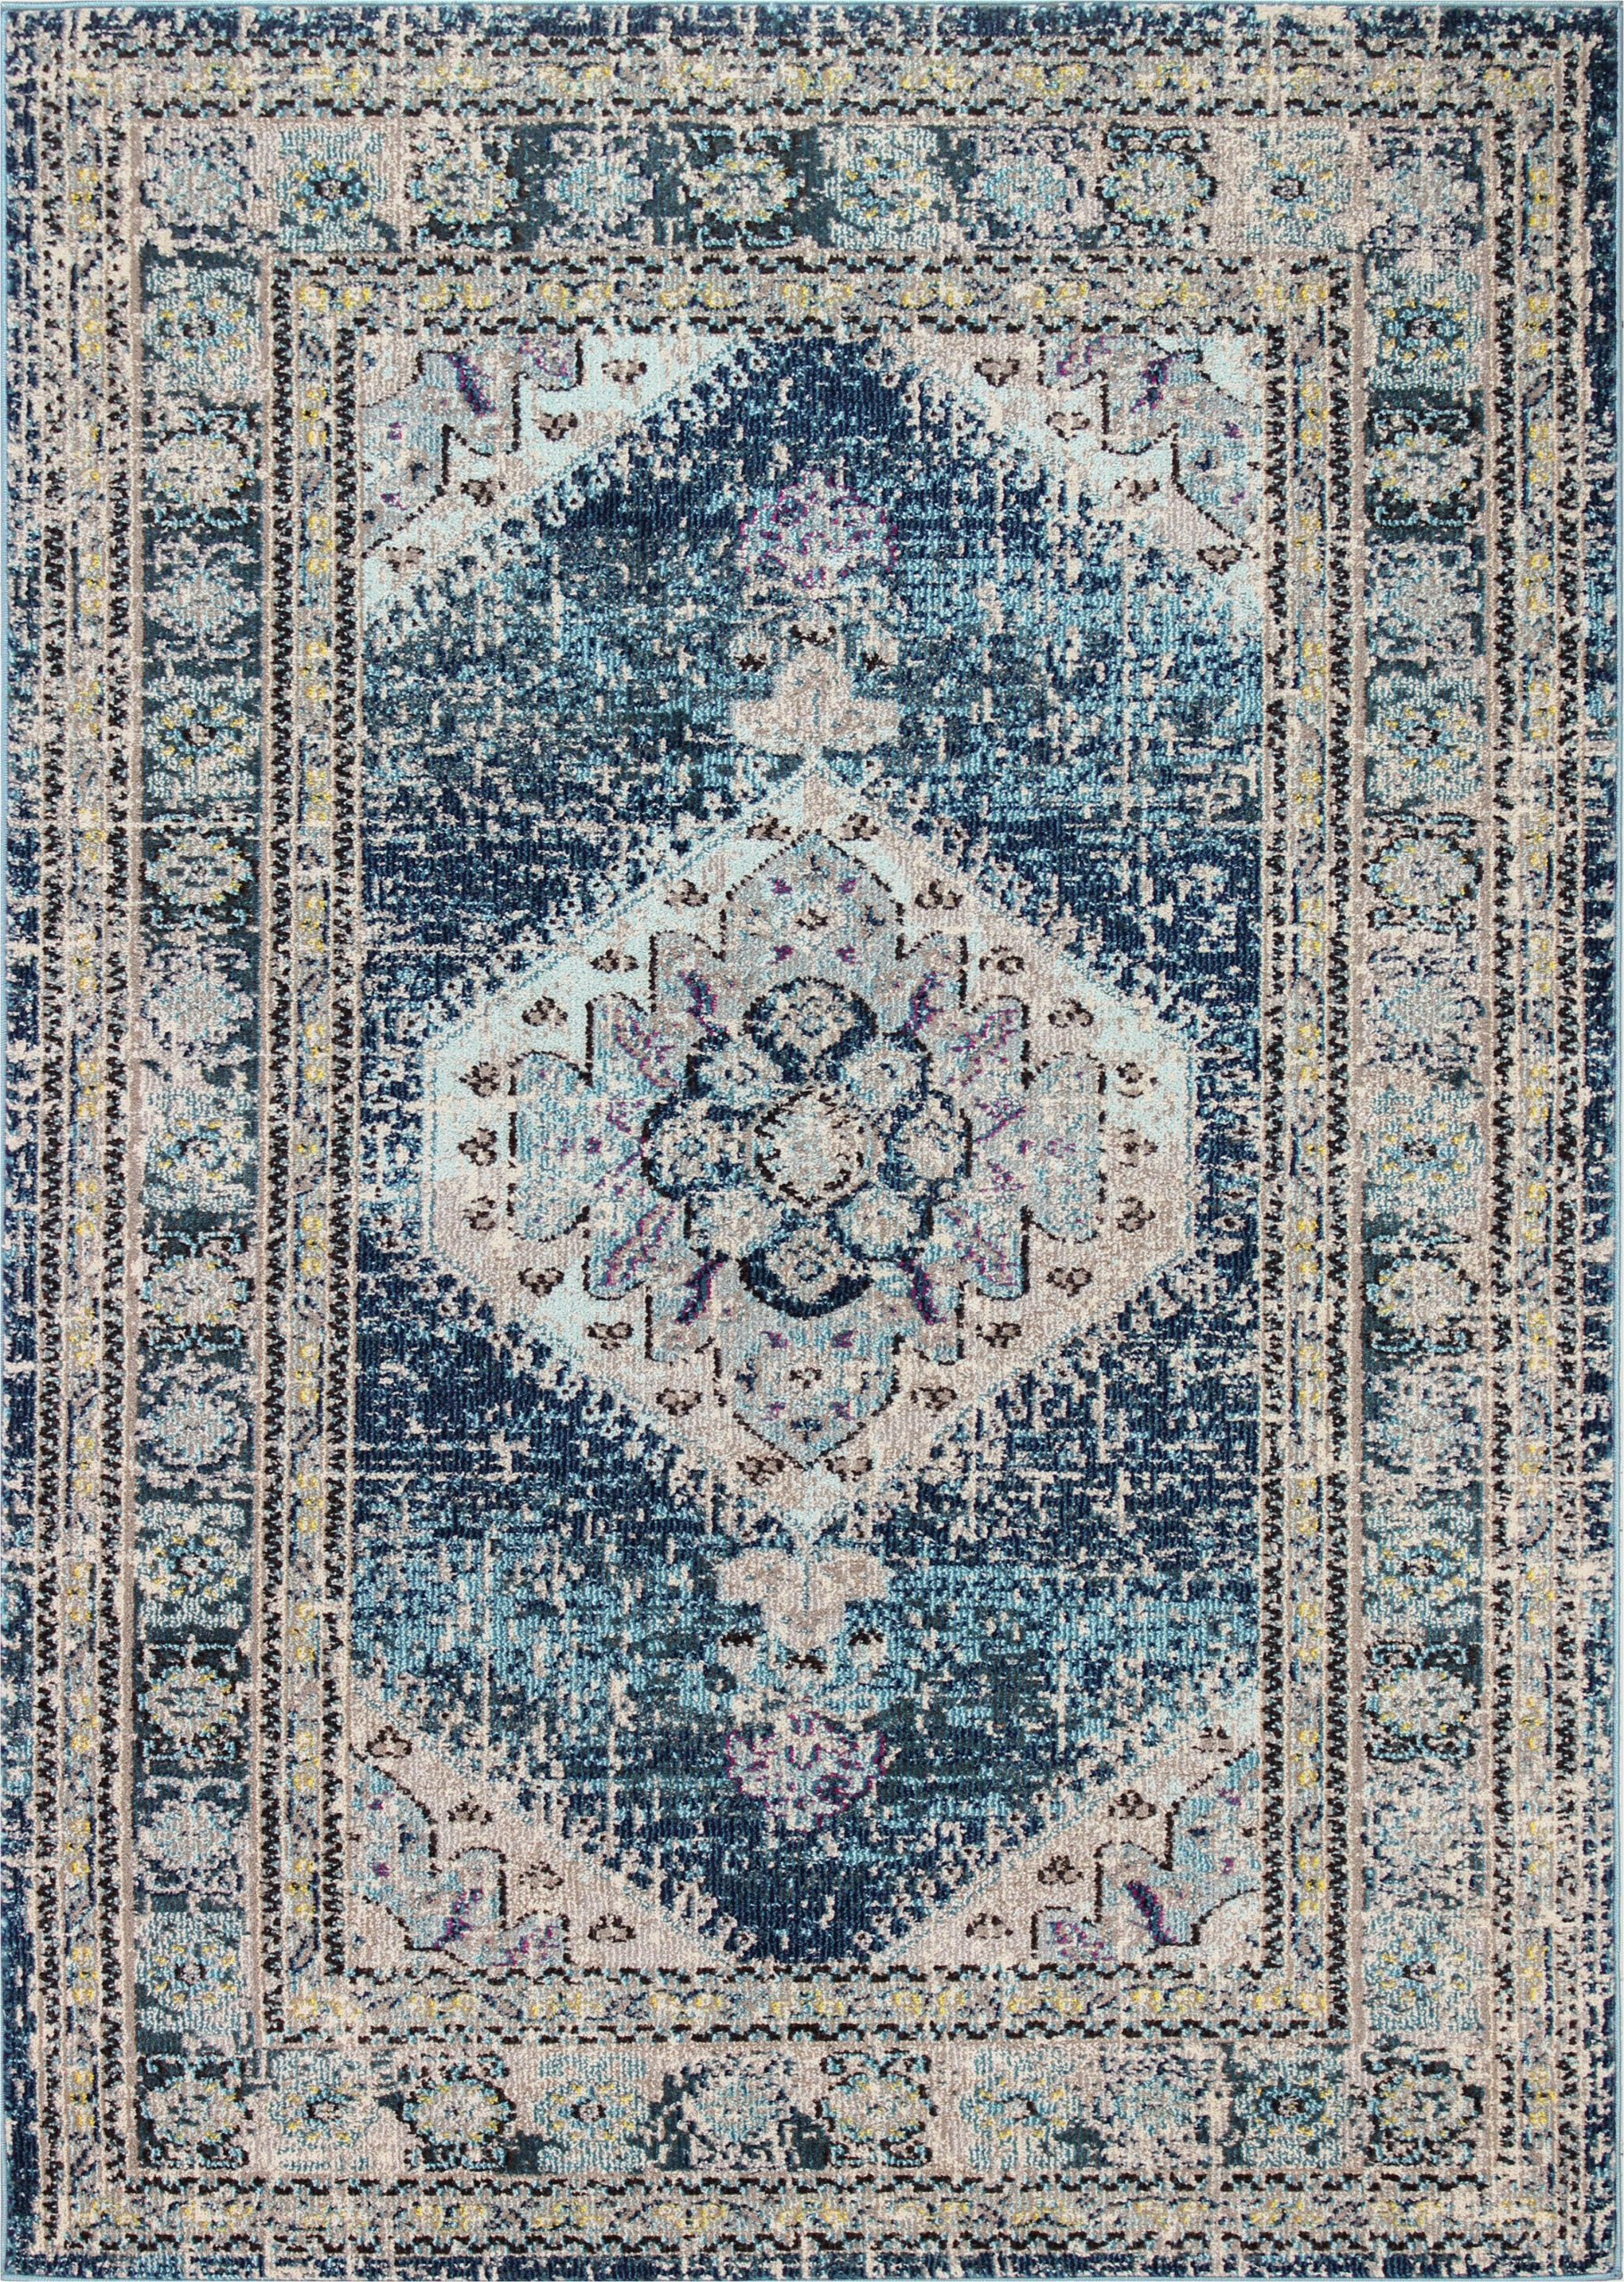 Teal area Rugs for Sale Teal Rugs You Ll Love In 2020